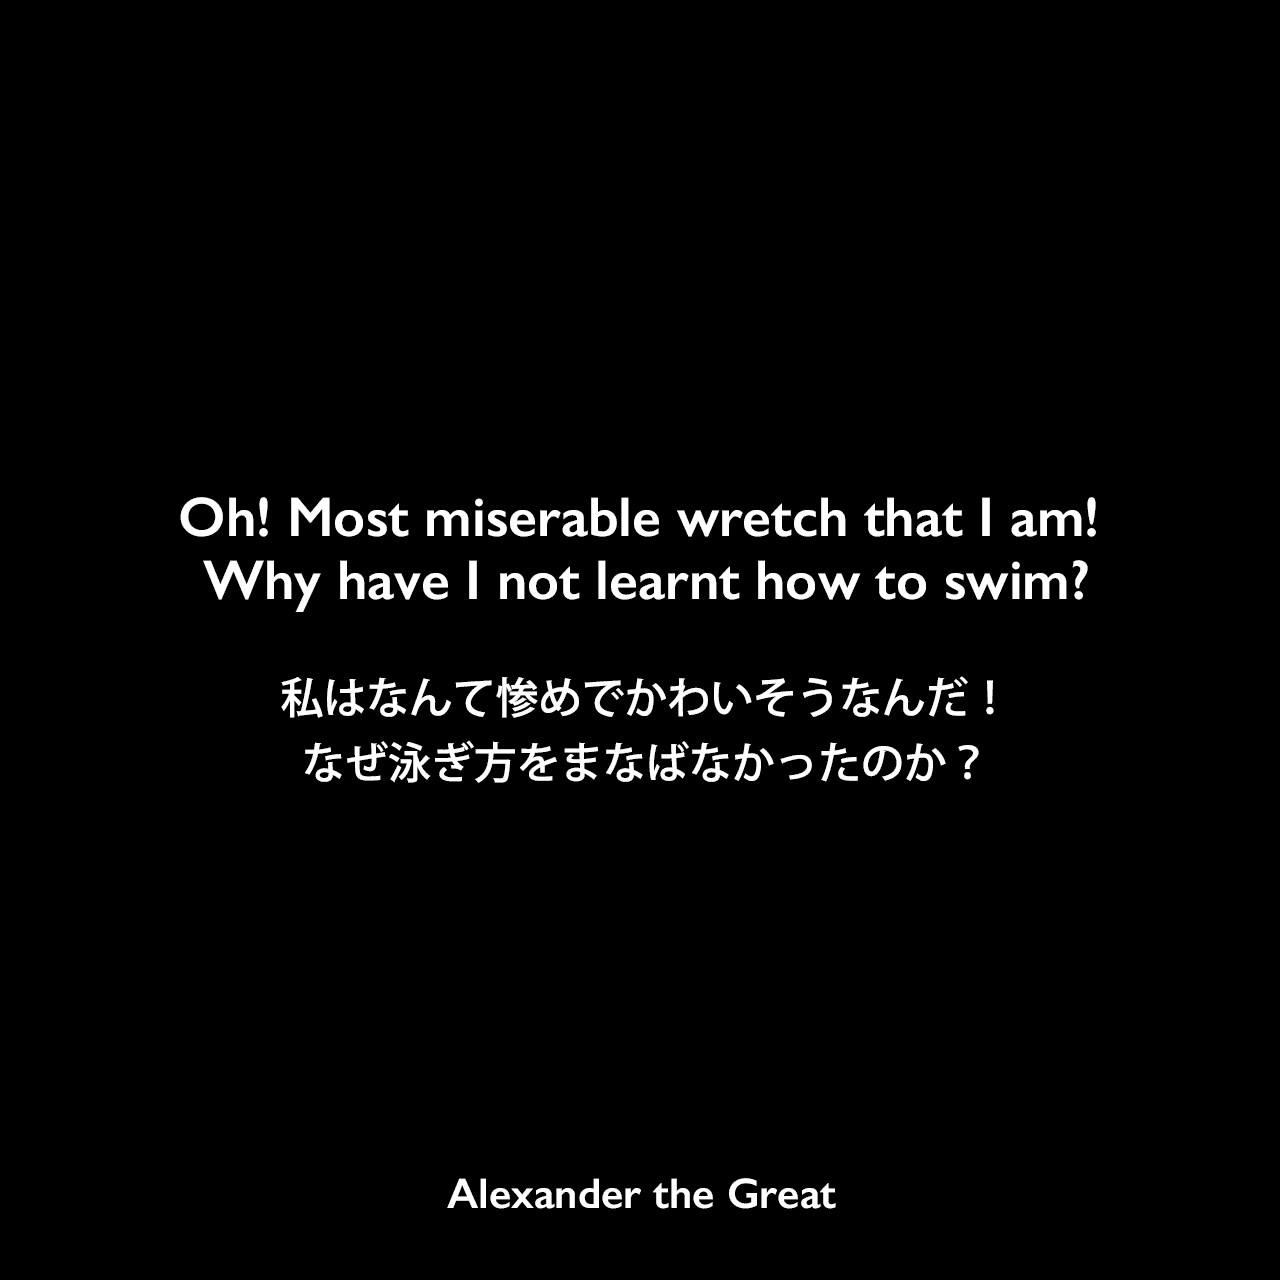 Oh! Most miserable wretch that I am! Why have I not learnt how to swim?私はなんて惨めでかわいそうなんだ！なぜ泳ぎ方をまなばなかったのか？Alexander the Great